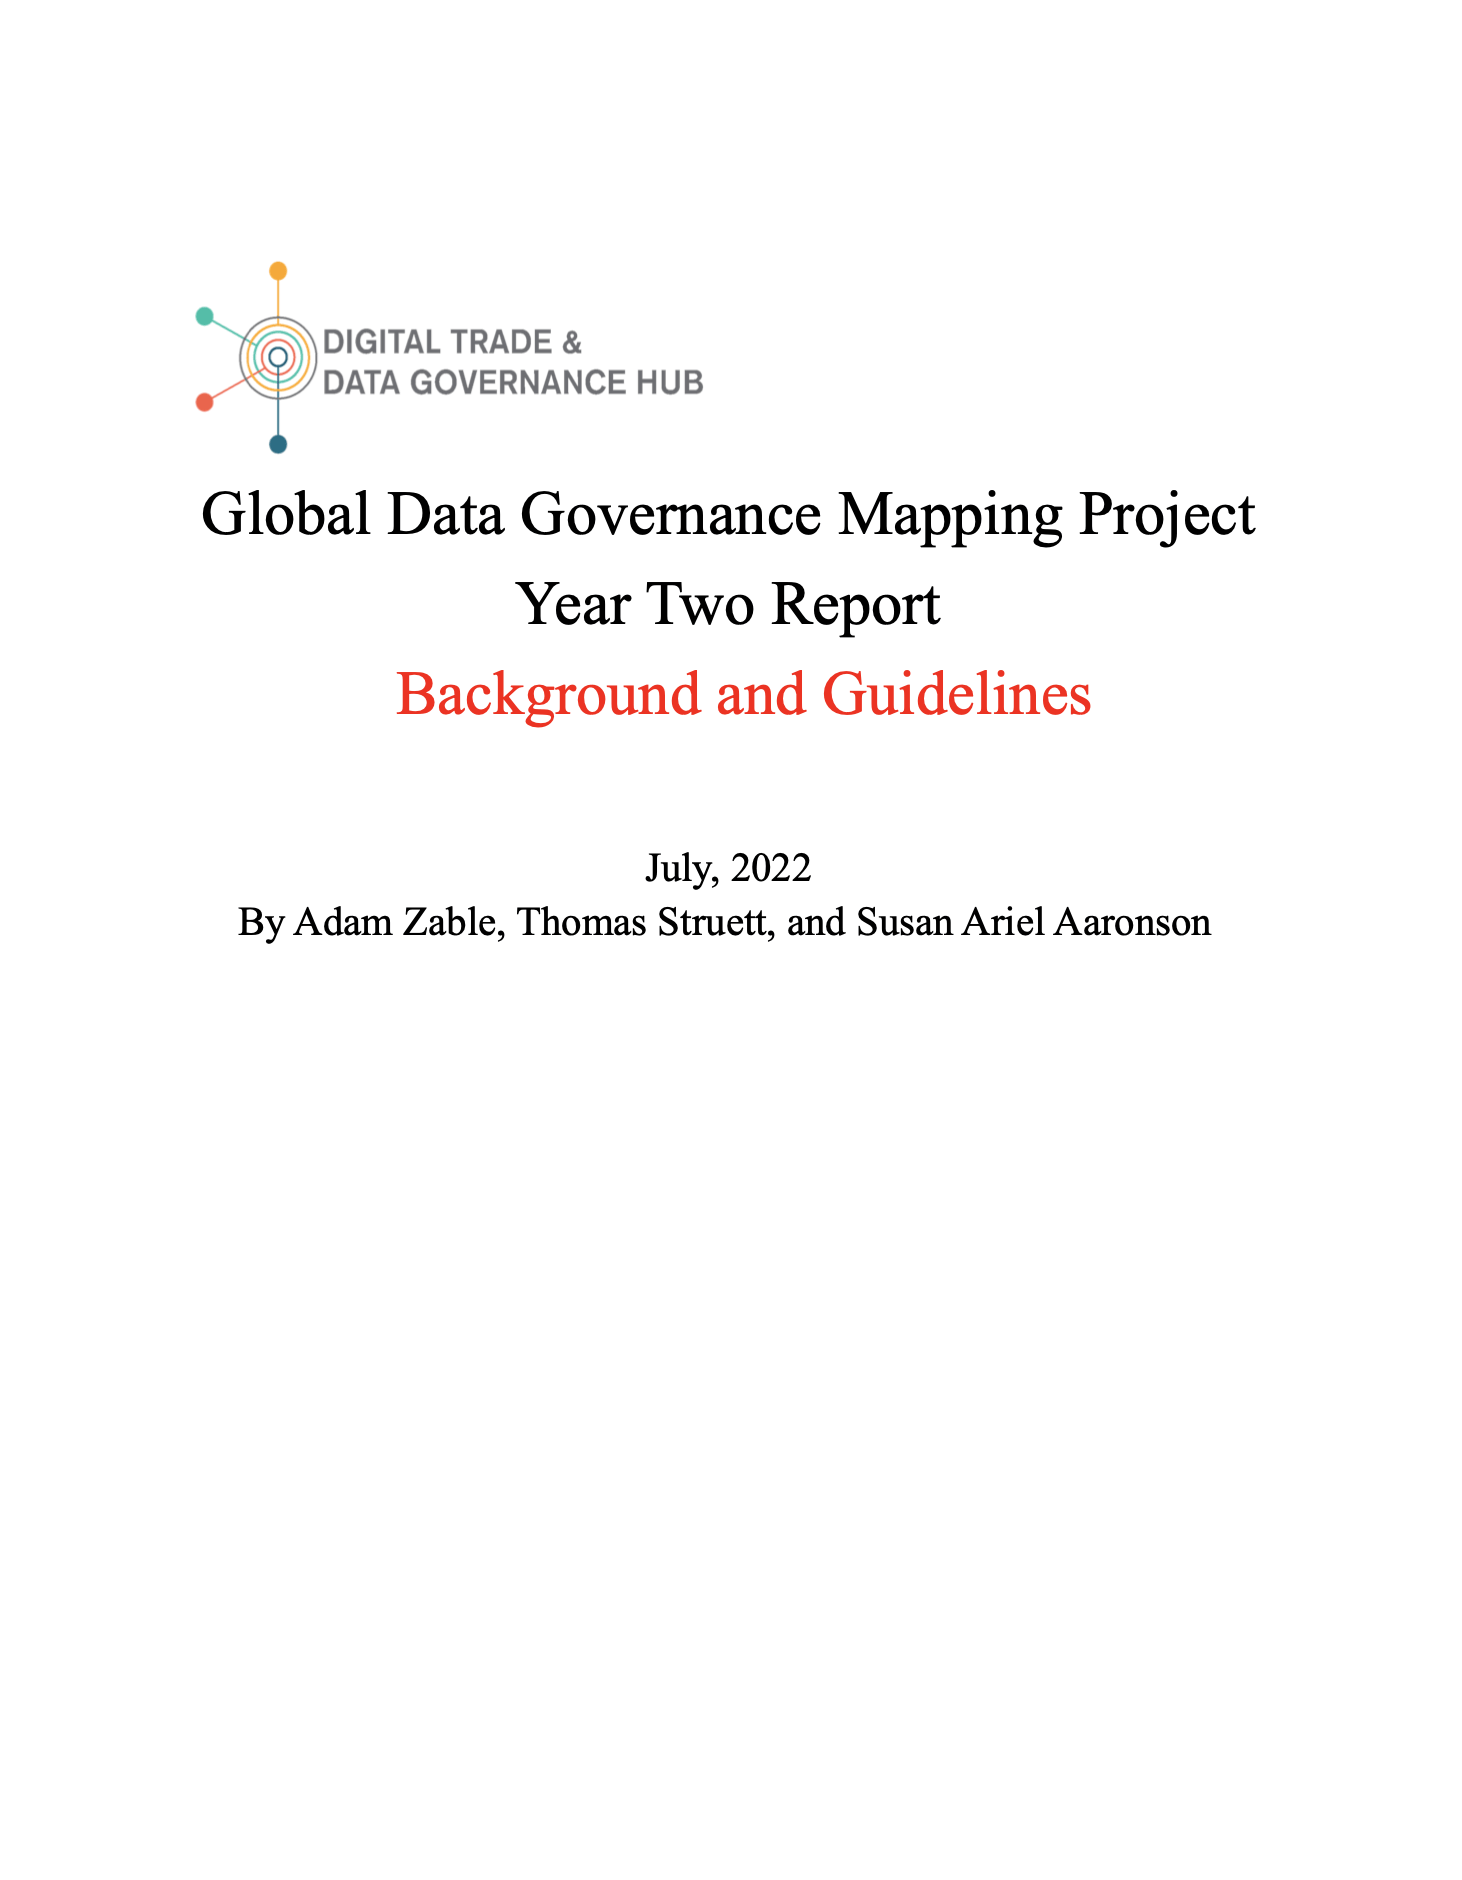 Global Data Governance Mapping Project - Year 2 Background and Annex